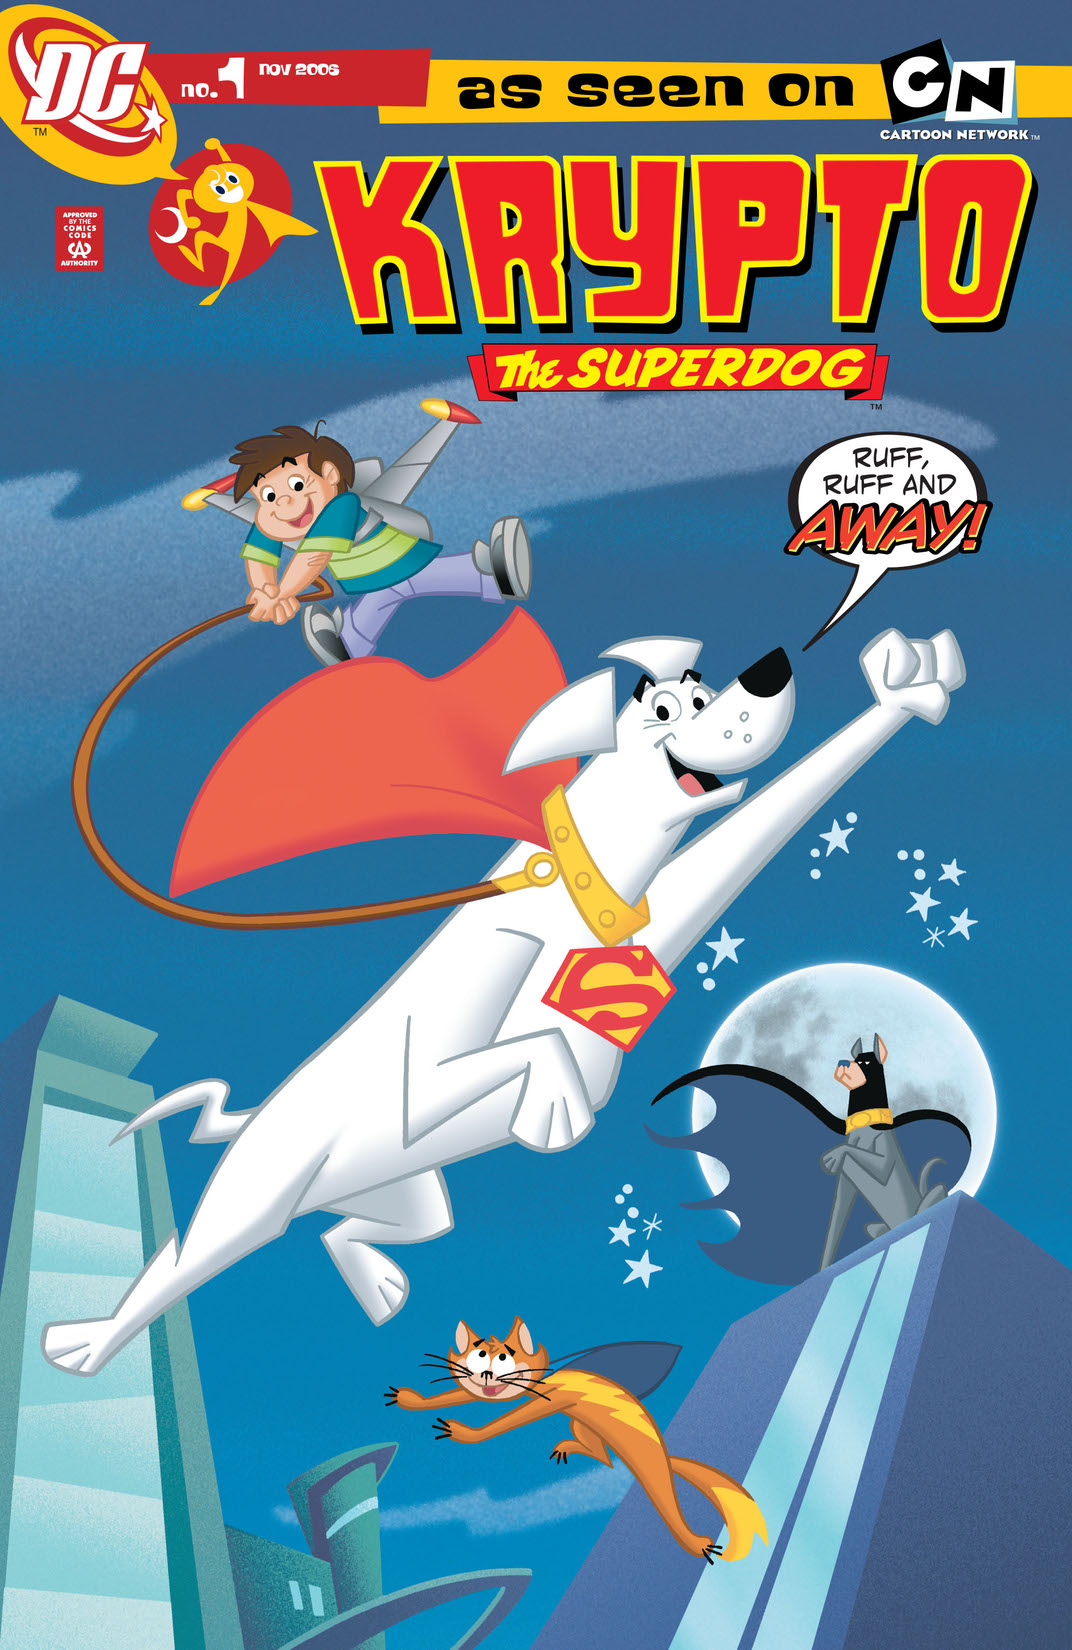 Krypto The Super Dog #1 preview images